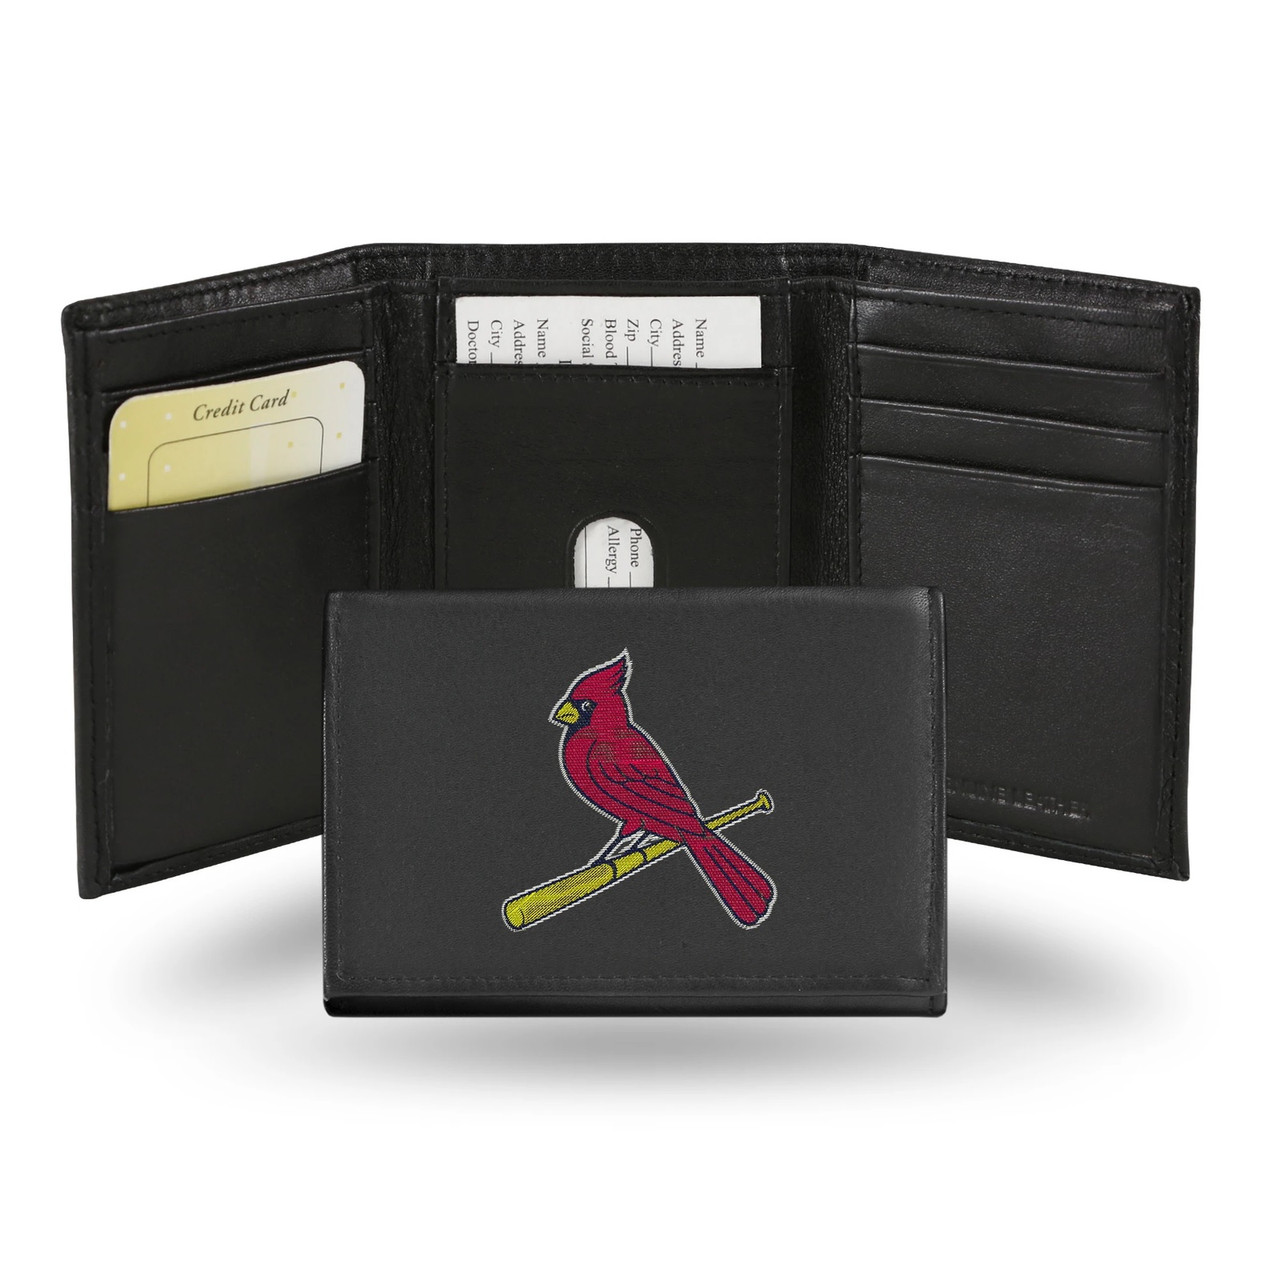 St. Louis Cardinals Wallet Trifold Leather Embroidered - Sports